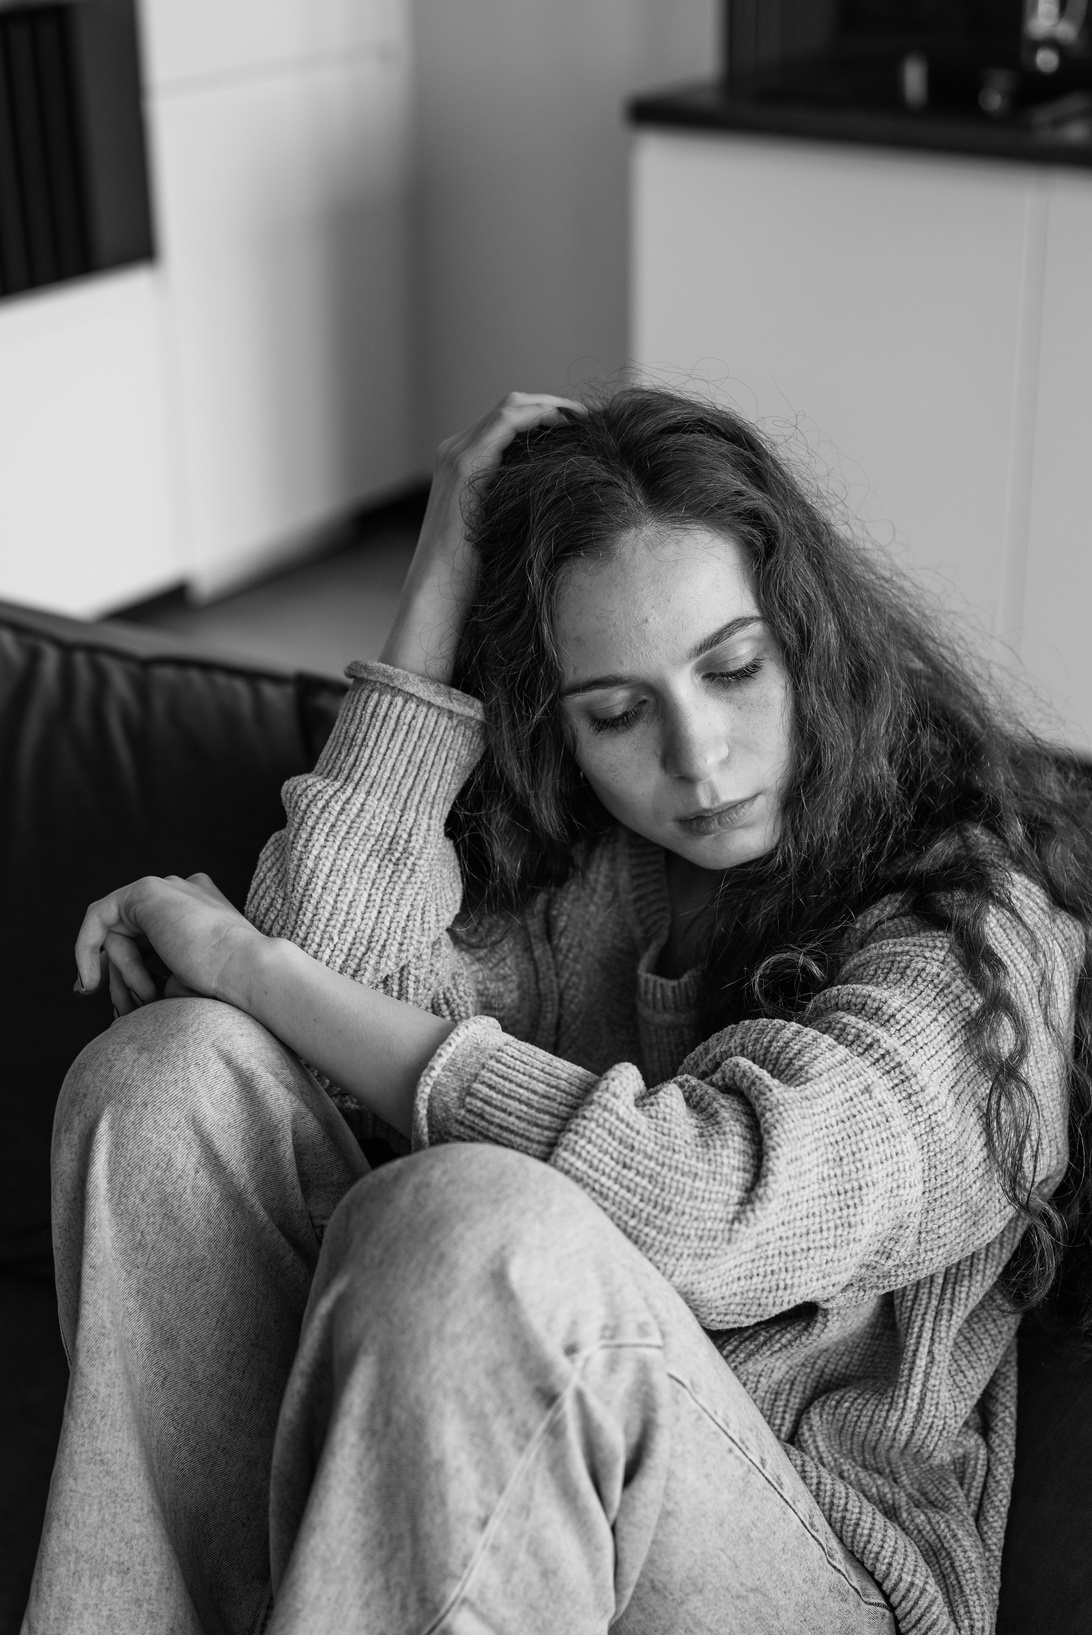 Woman in Sweater Sitting on Couch